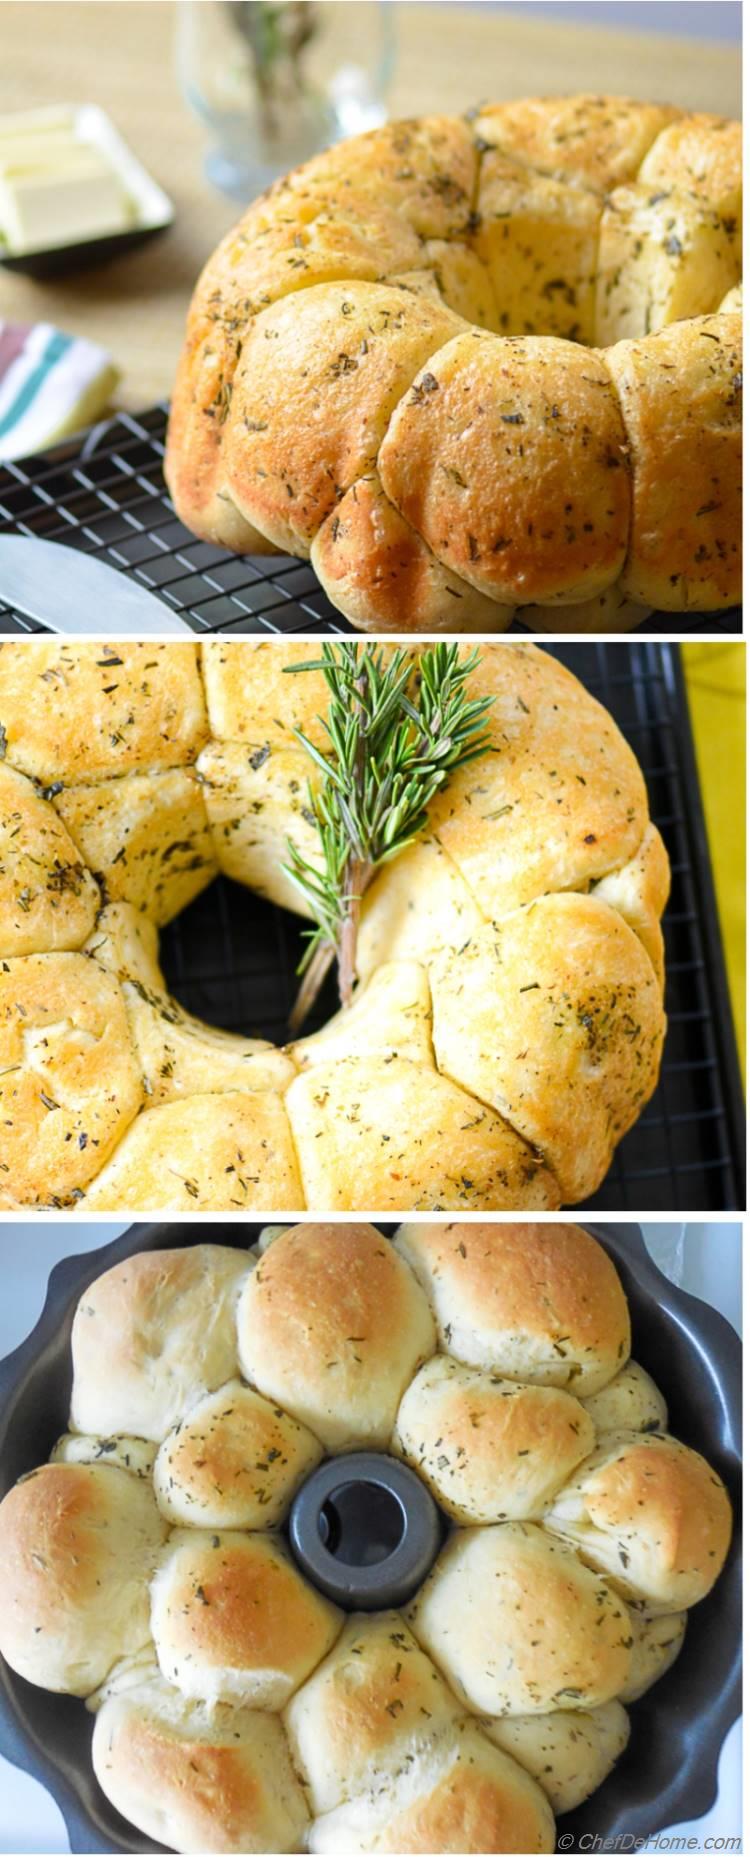 Homemade Pull-Apart Herb Monkey Bread. Great bread for family dinner and dinner parties.